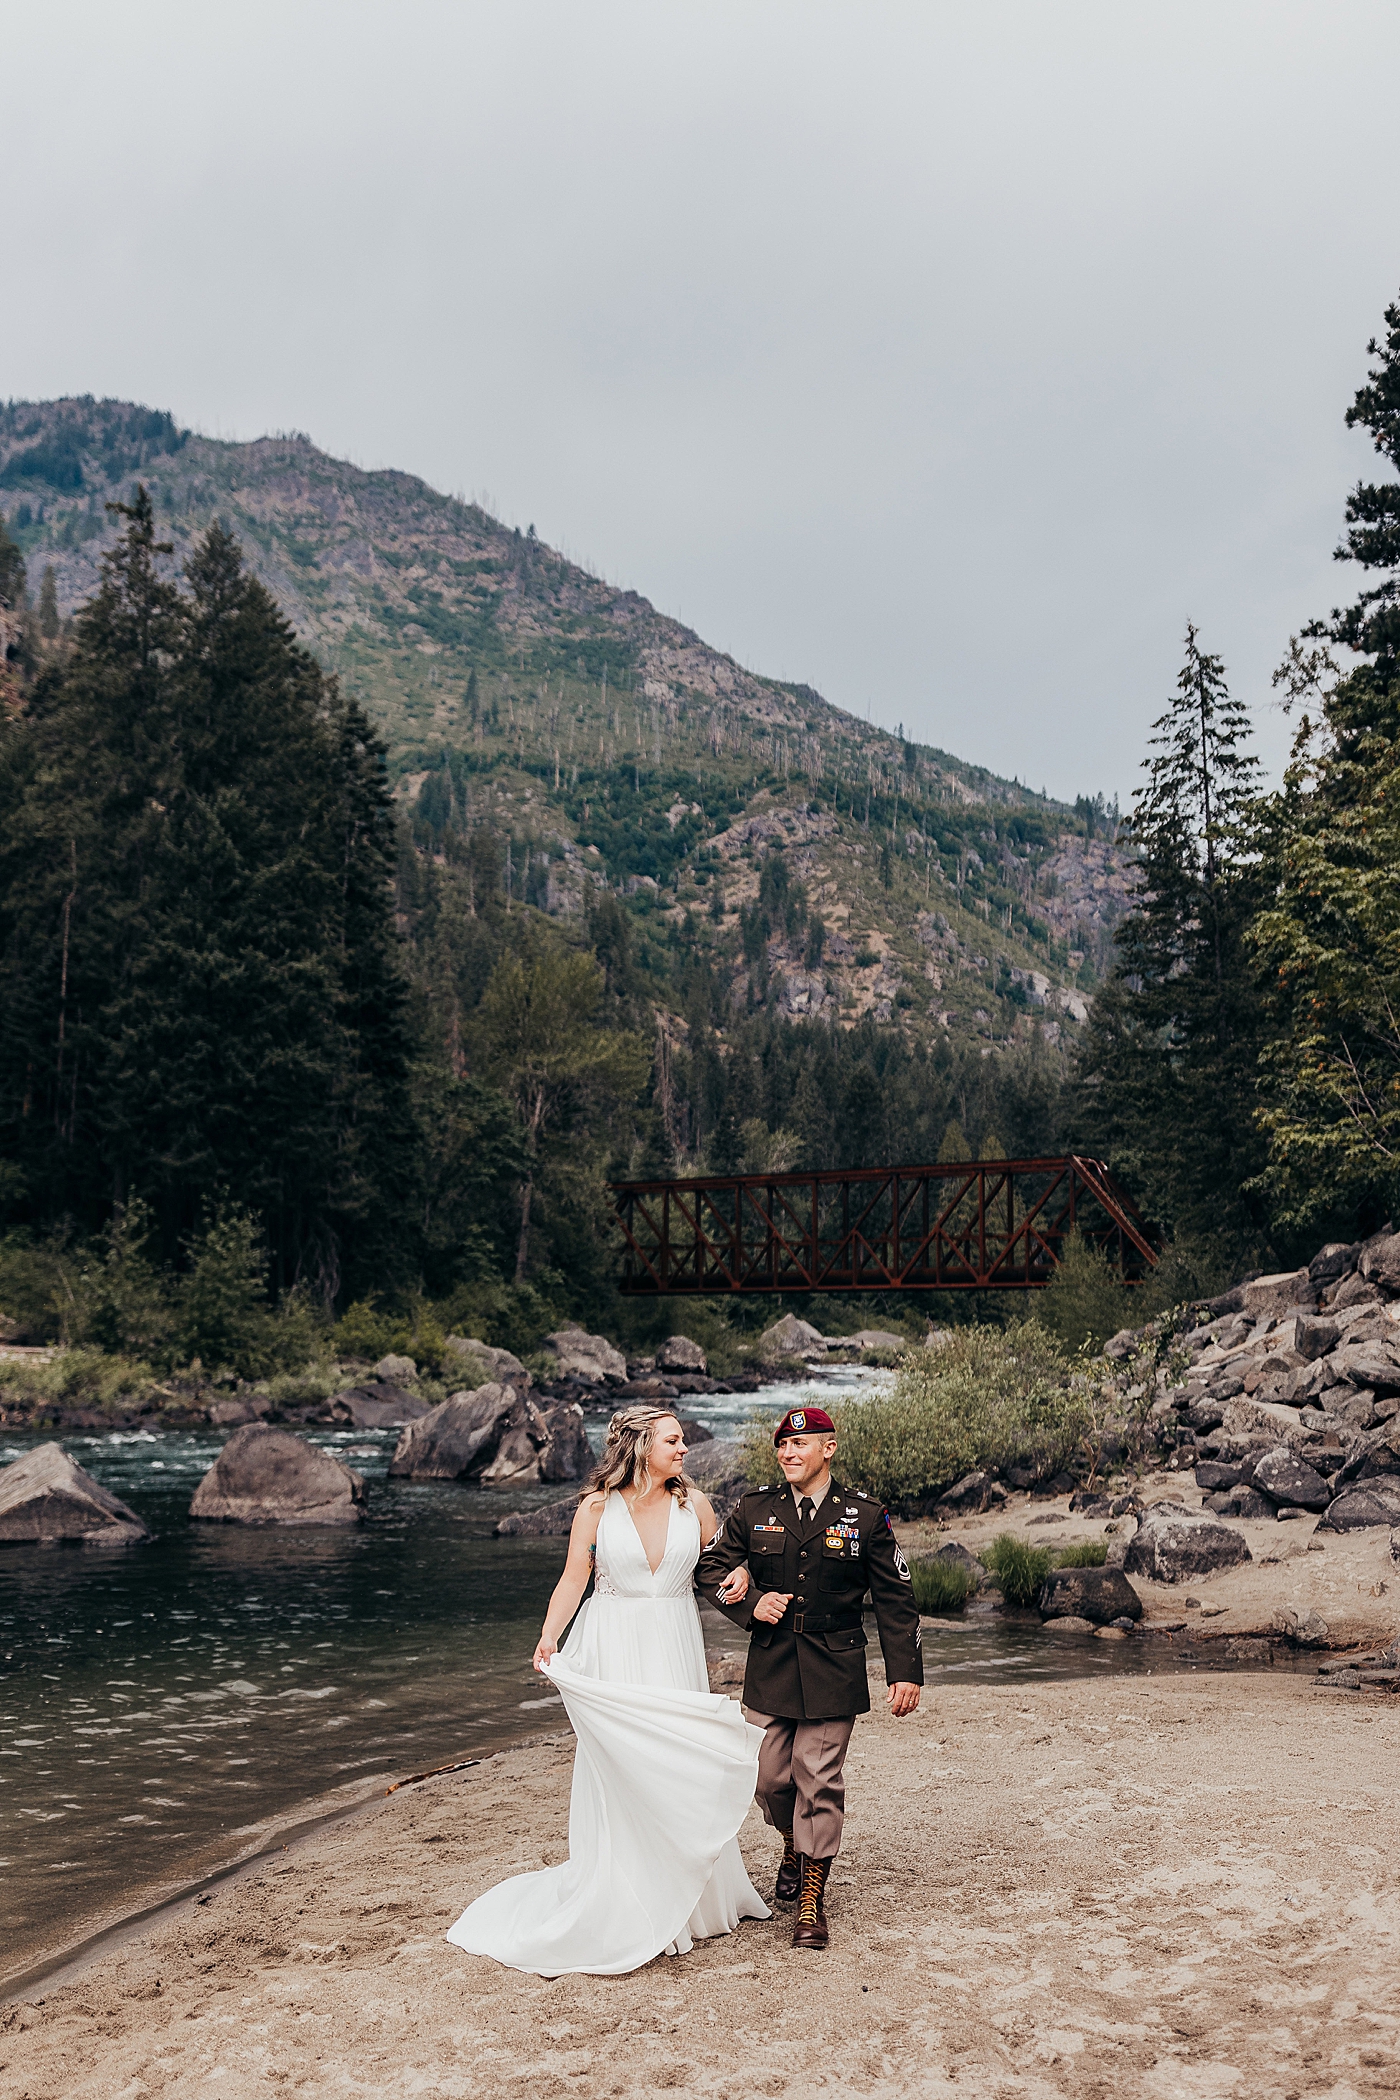 Couple walking along the water in wedding dress and Army Dress Blues. Photo by Megan Montalvo Photography.